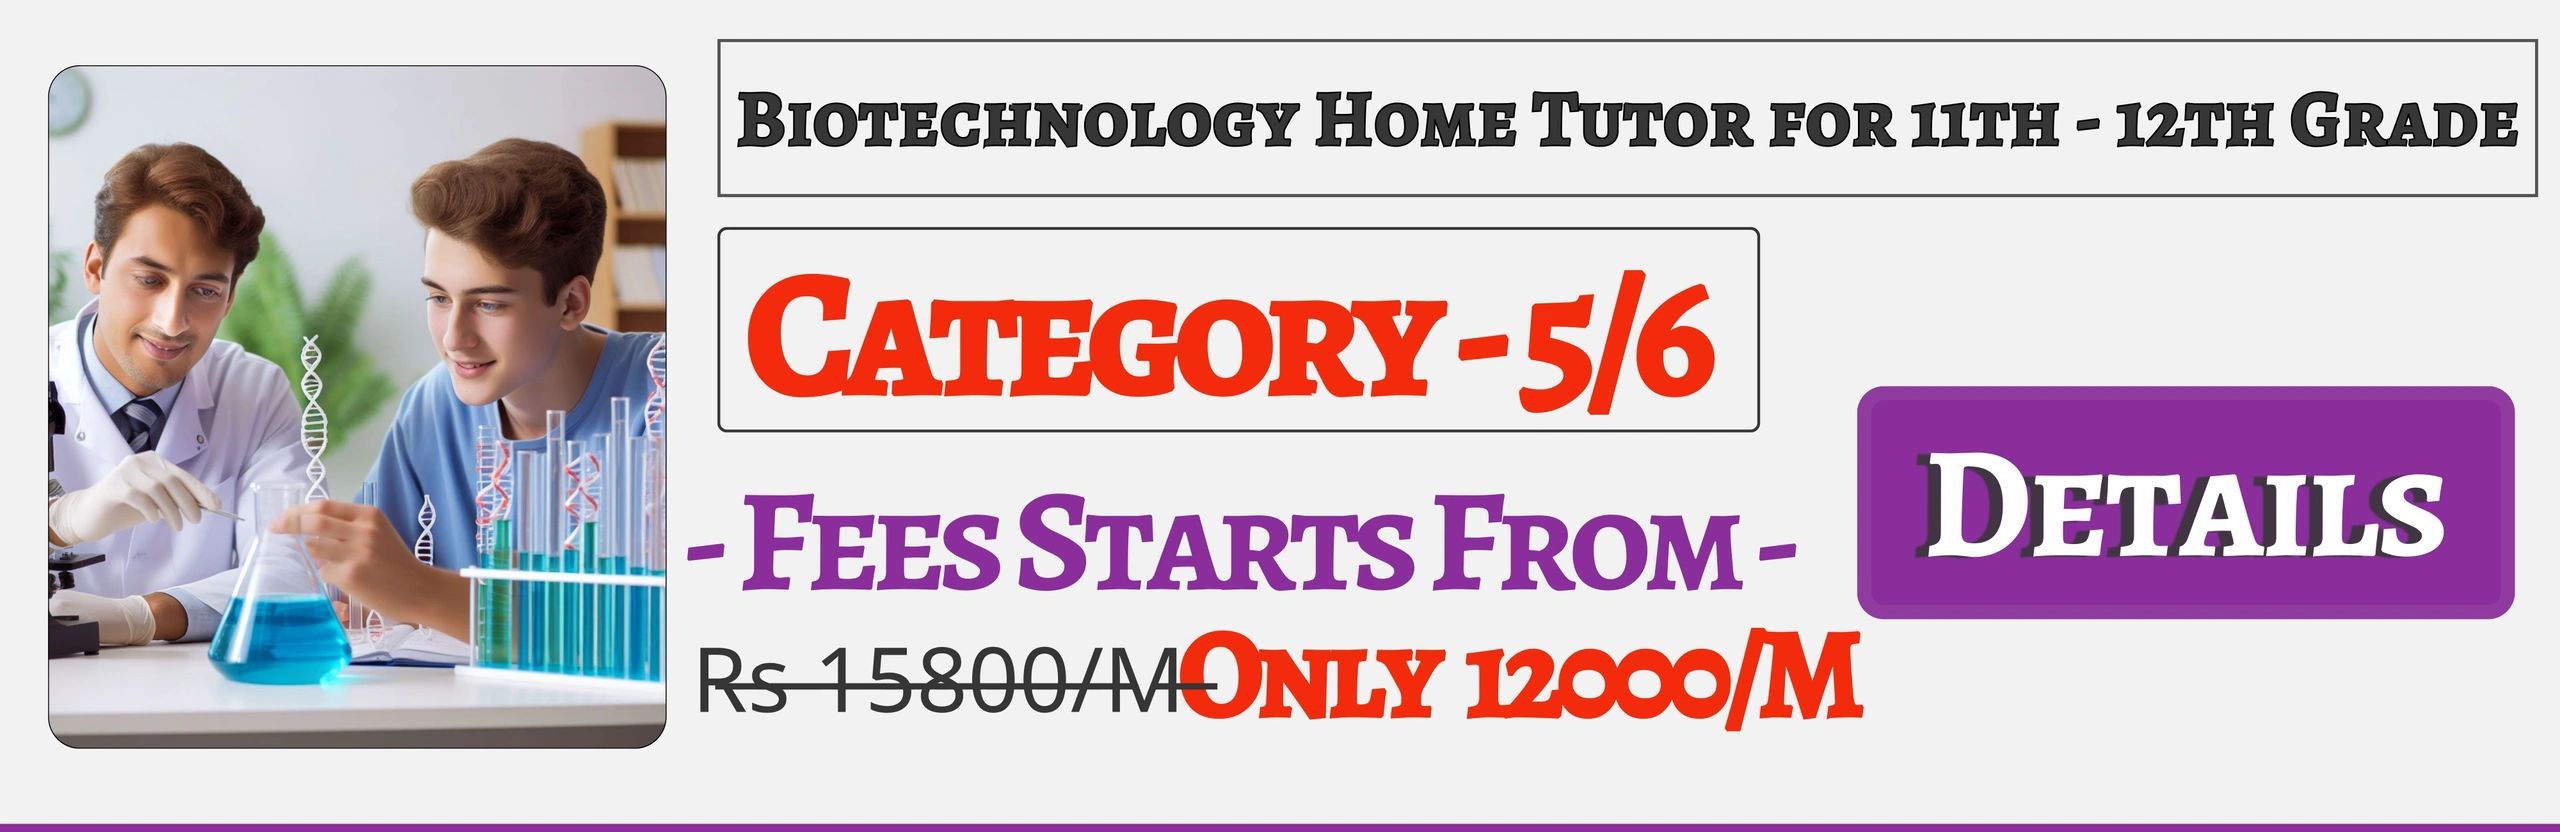 Book Best Nearby Biotechnology Home Tuition Tutors For 11th & 12th In Jaipur , Fees Only 12000/M